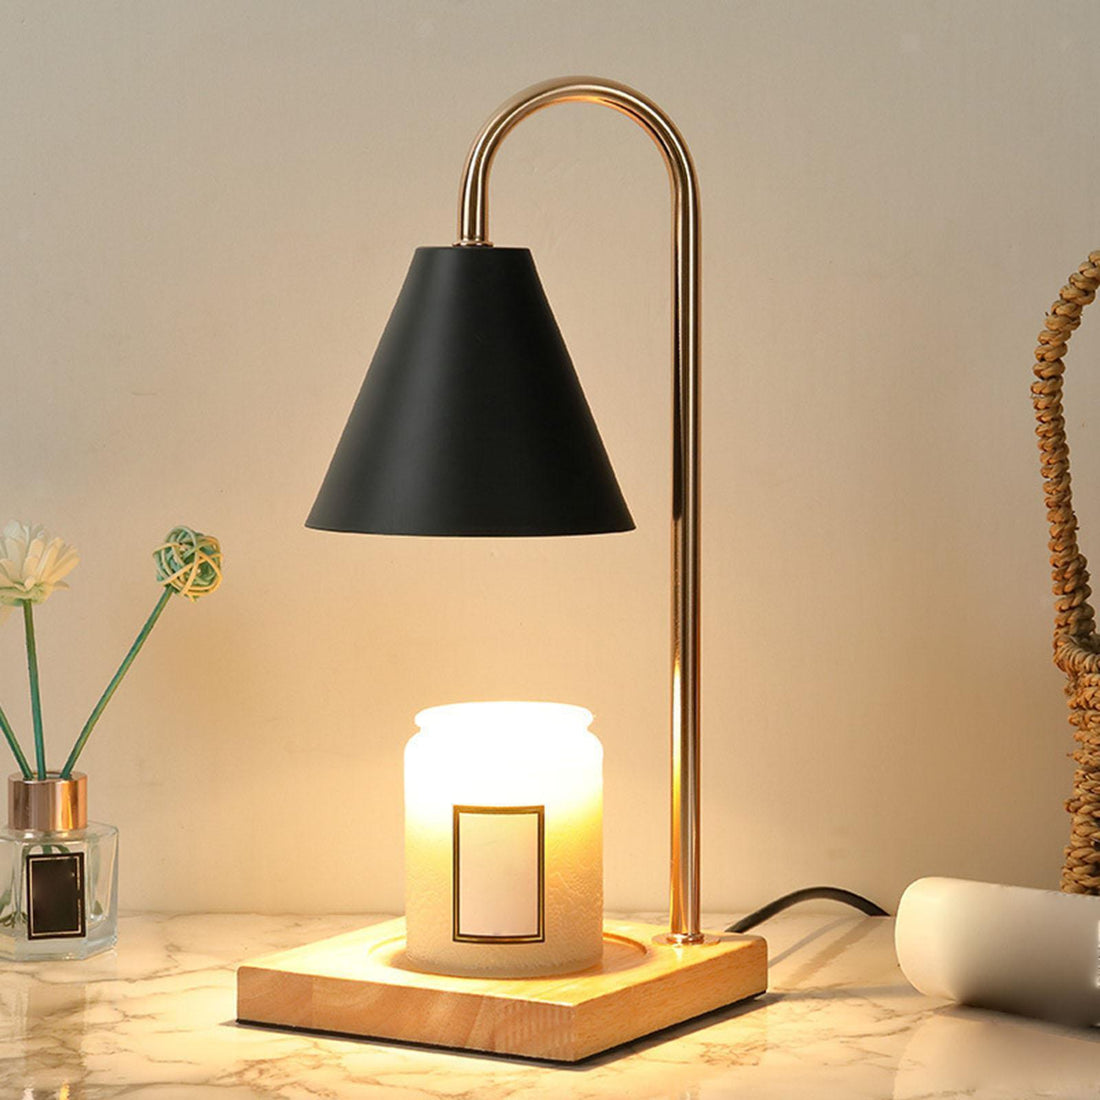 Candle Warmer Lamps: The Perfect Solution for a Safe and Fragrant Home - STANZA Artigiana